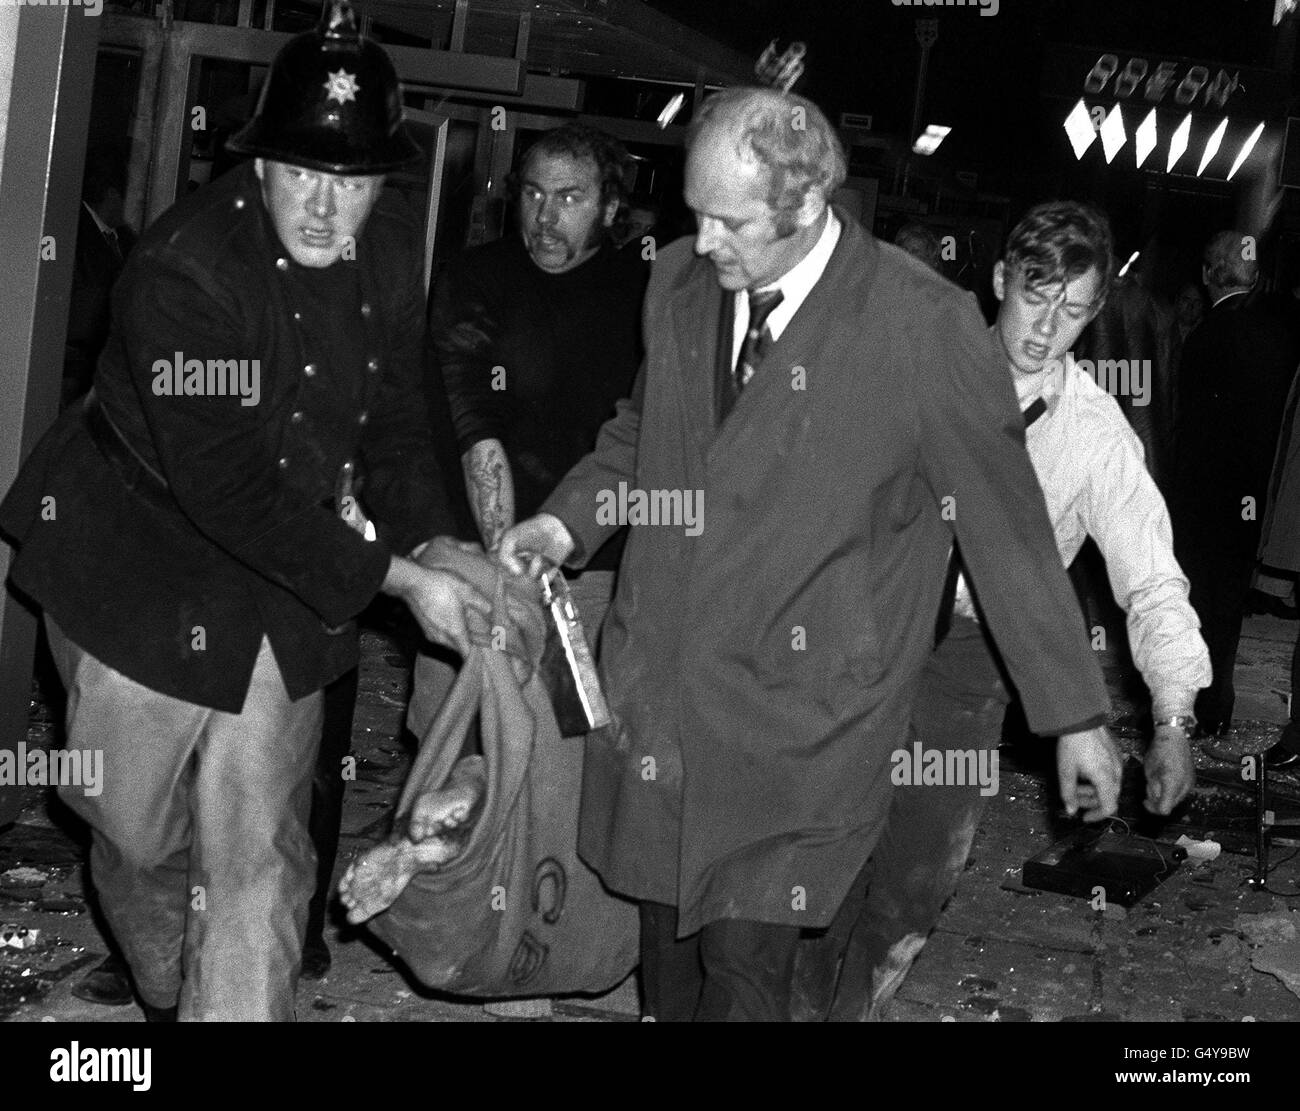 A fireman and rescue workers carry a barefooted body away from the scene of one of the Birmingham pub bombings. Two pubs, The Mulberry and The Tavern in the Town were targeted in the attacks ; at least 19 people died and over 200 were injured. *Many of the victims had their clothes blown off in the blast. 21/11/04: A memorial service is taking place to mark the 30th anniversary of one of mainland Britain's worst terrorist atrocities. Hundreds of people, including survivors, will gather in Birmingham at 4pm to remember the 21 people who died when two bombs ripped through two city centre pubs. Stock Photo